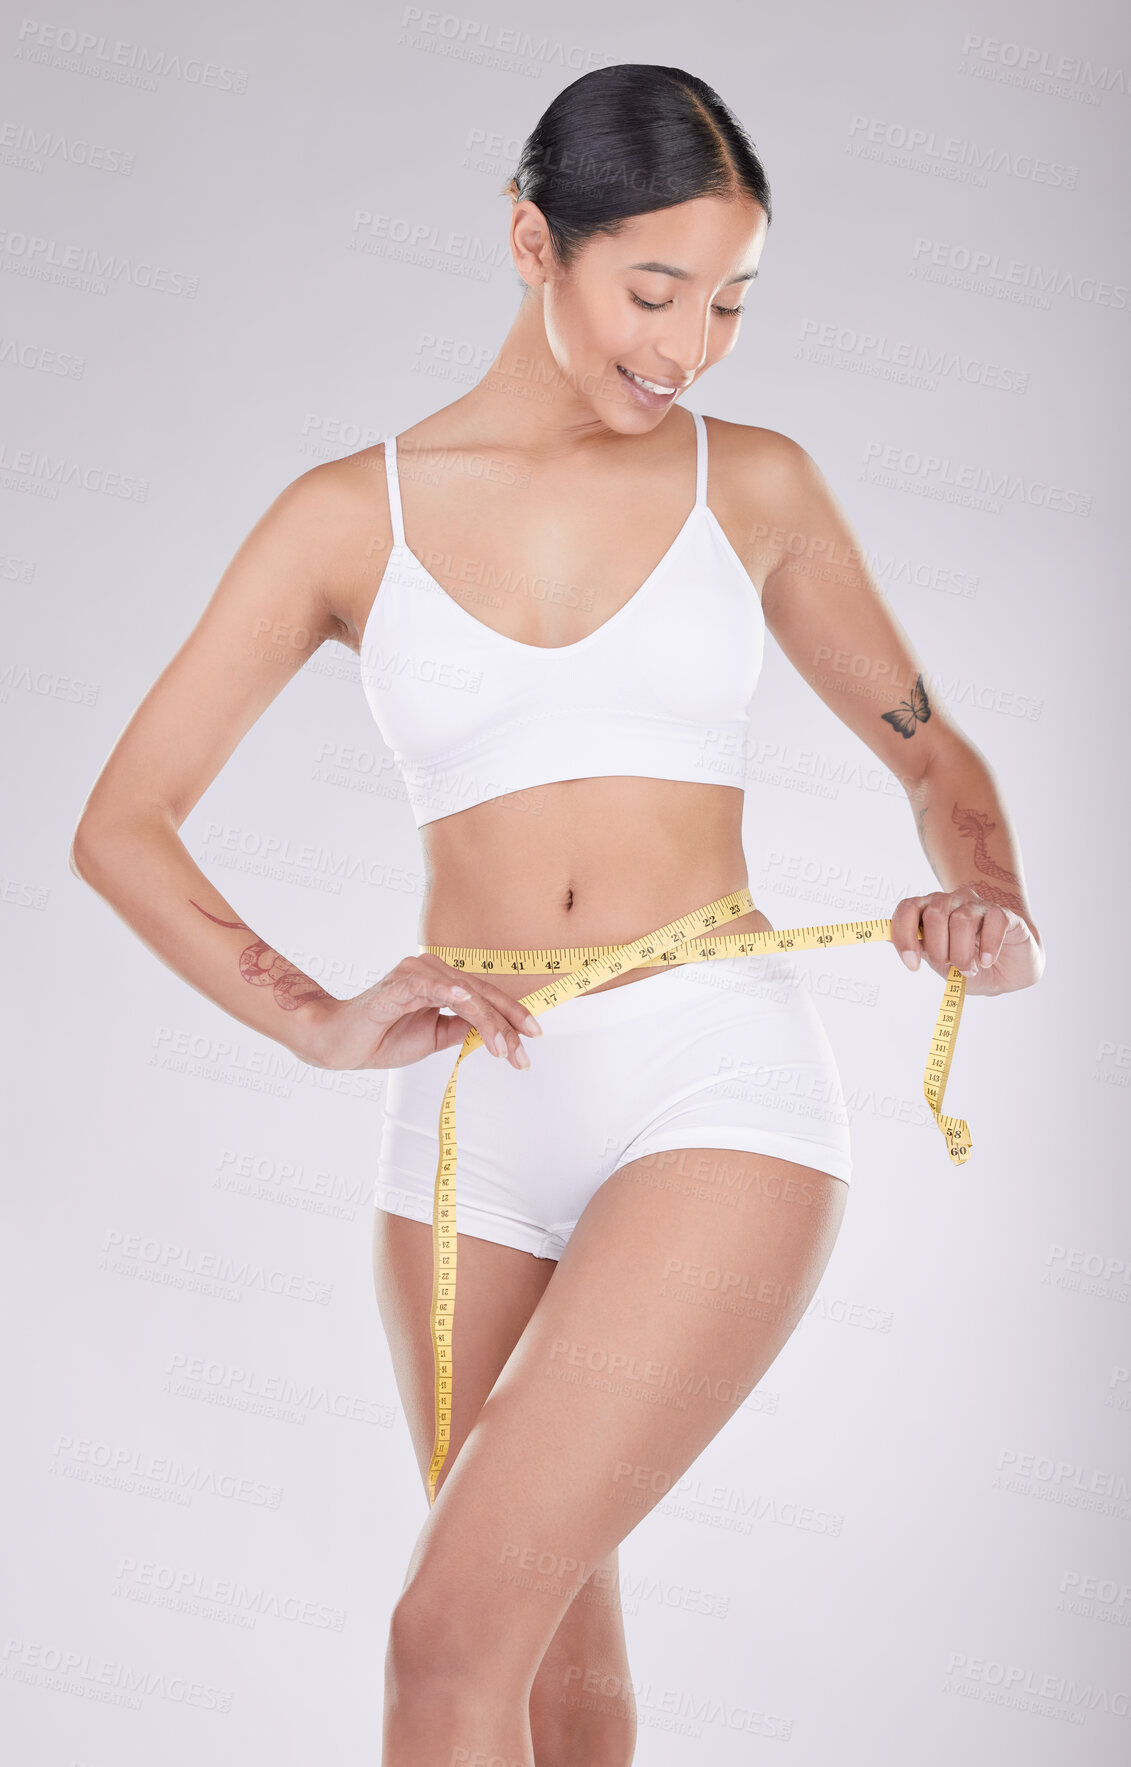 Buy stock photo Shot of an attractive young woman standing in the studio and using a measuring tape around her waist